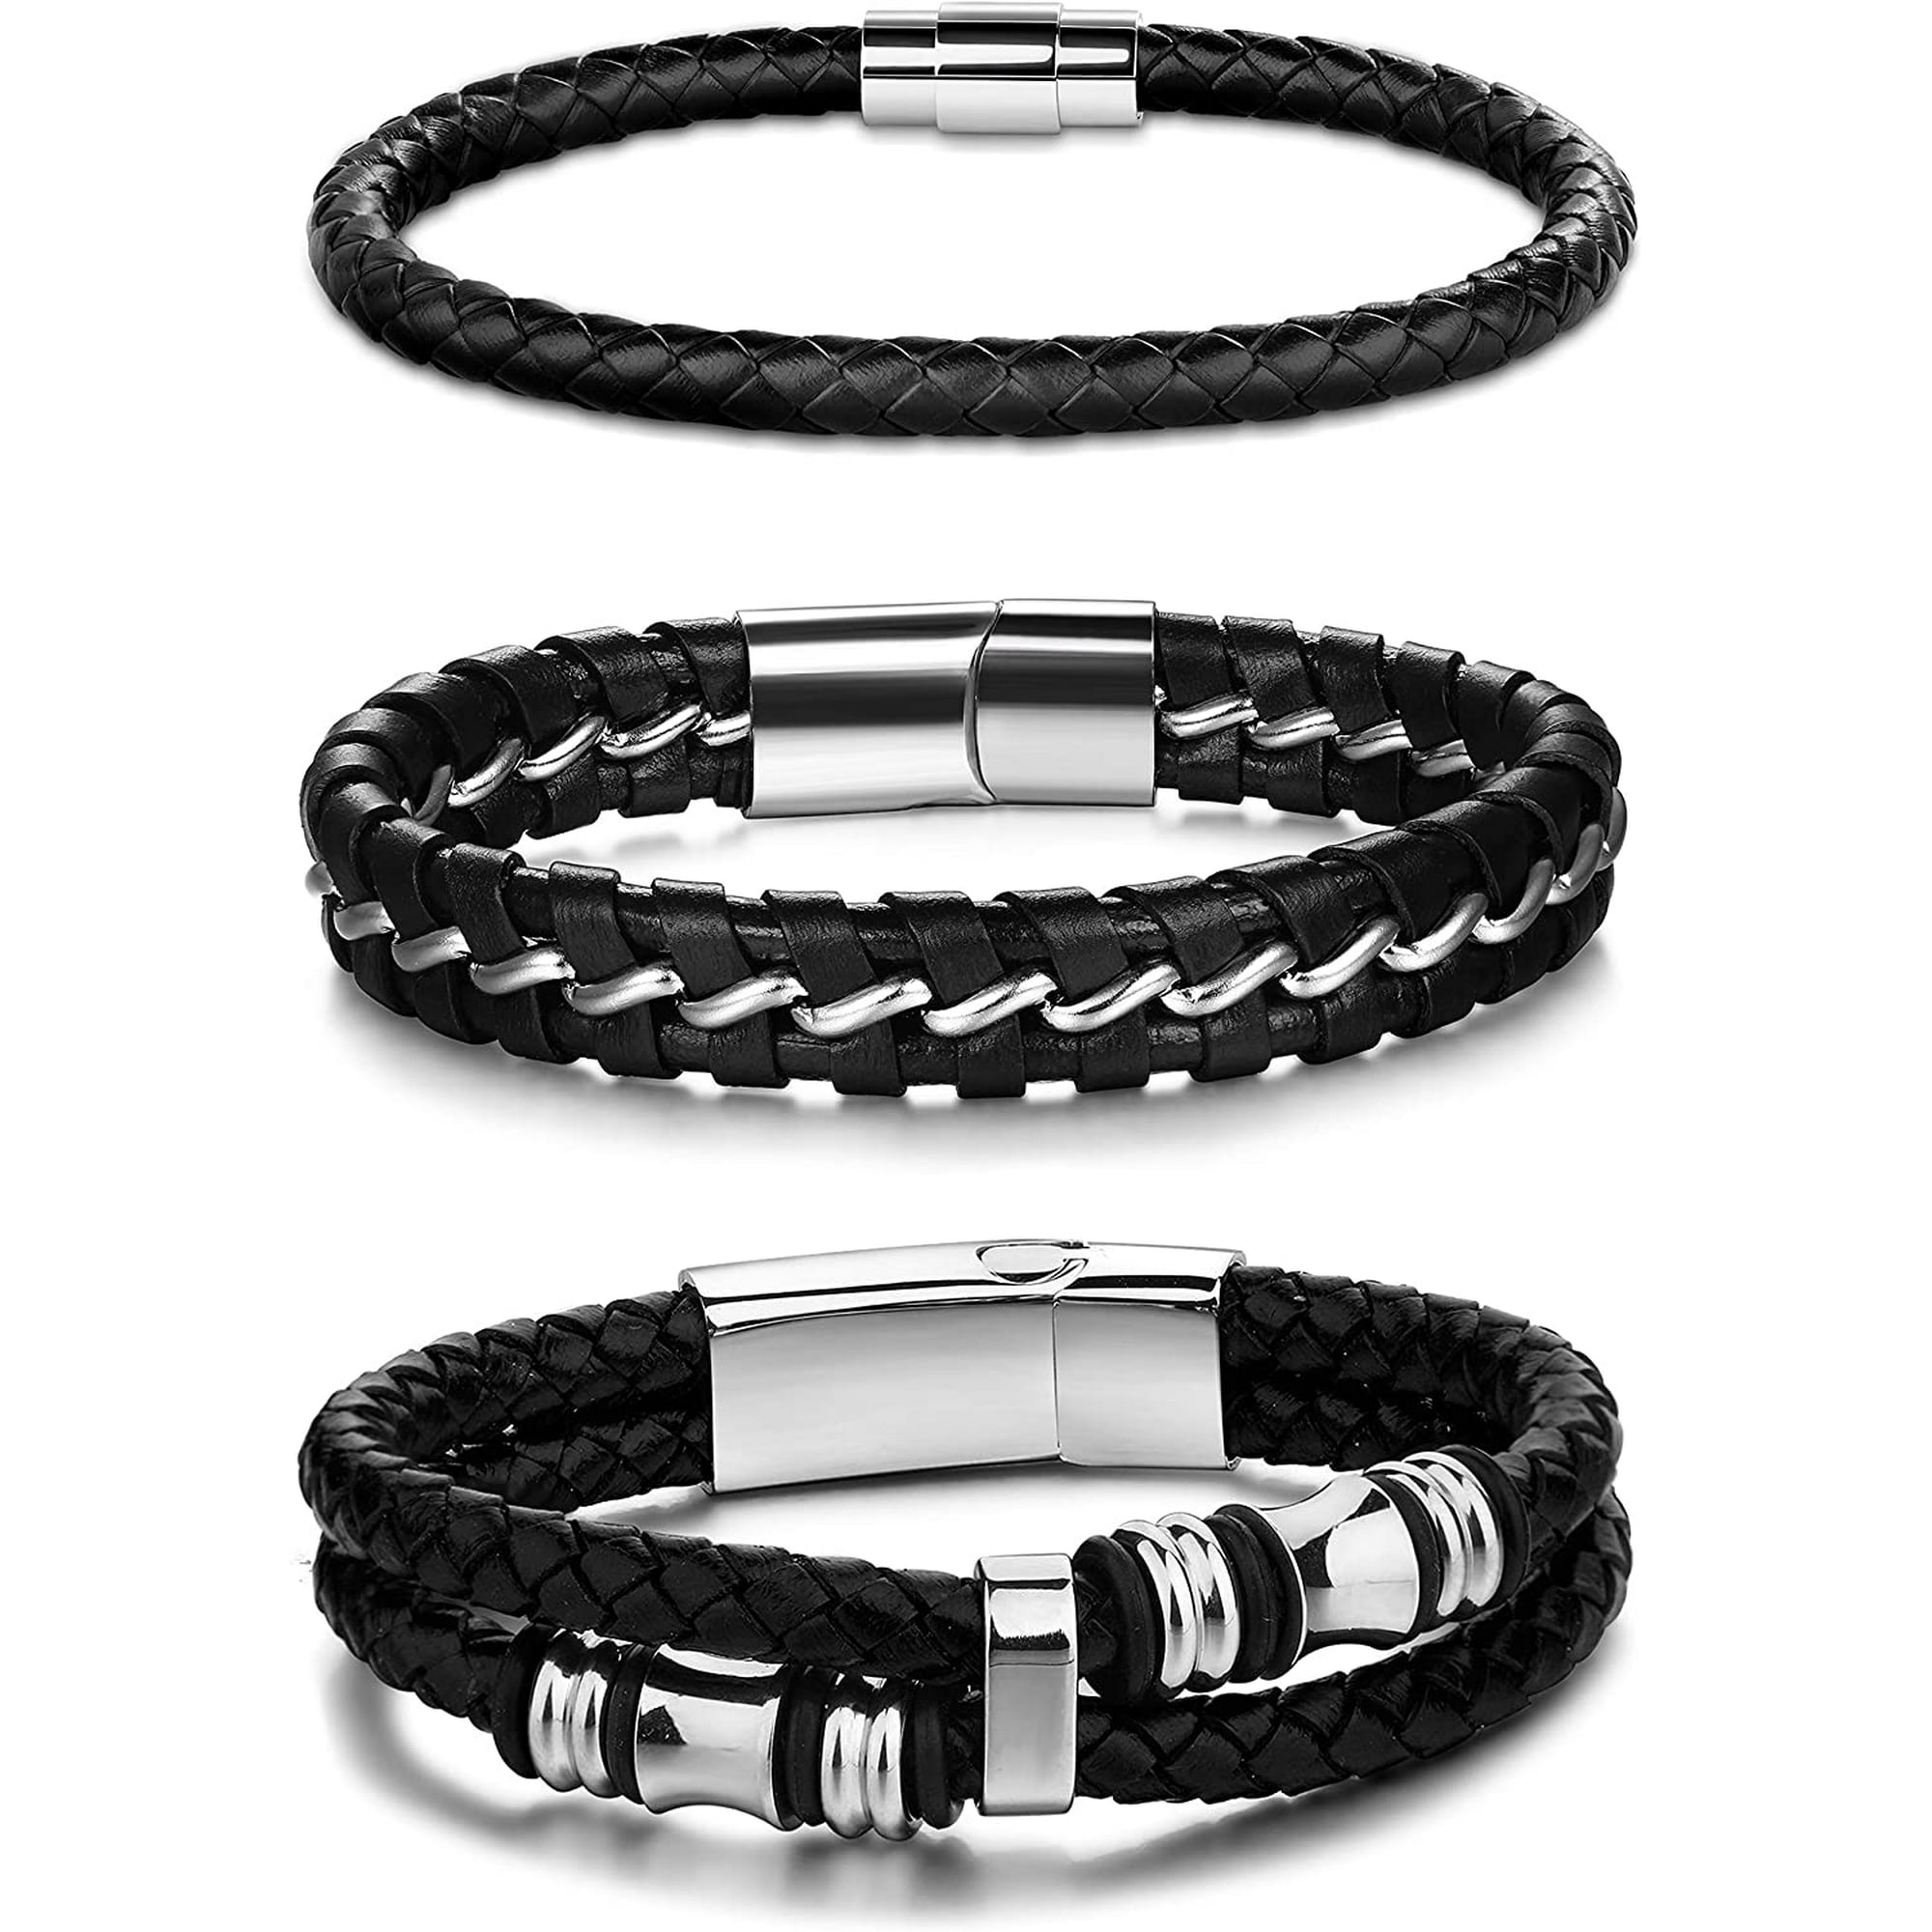 Men's Stainless Steel Magnetic Buckle Bracelet Cool Bangle Cuff Leather Braided